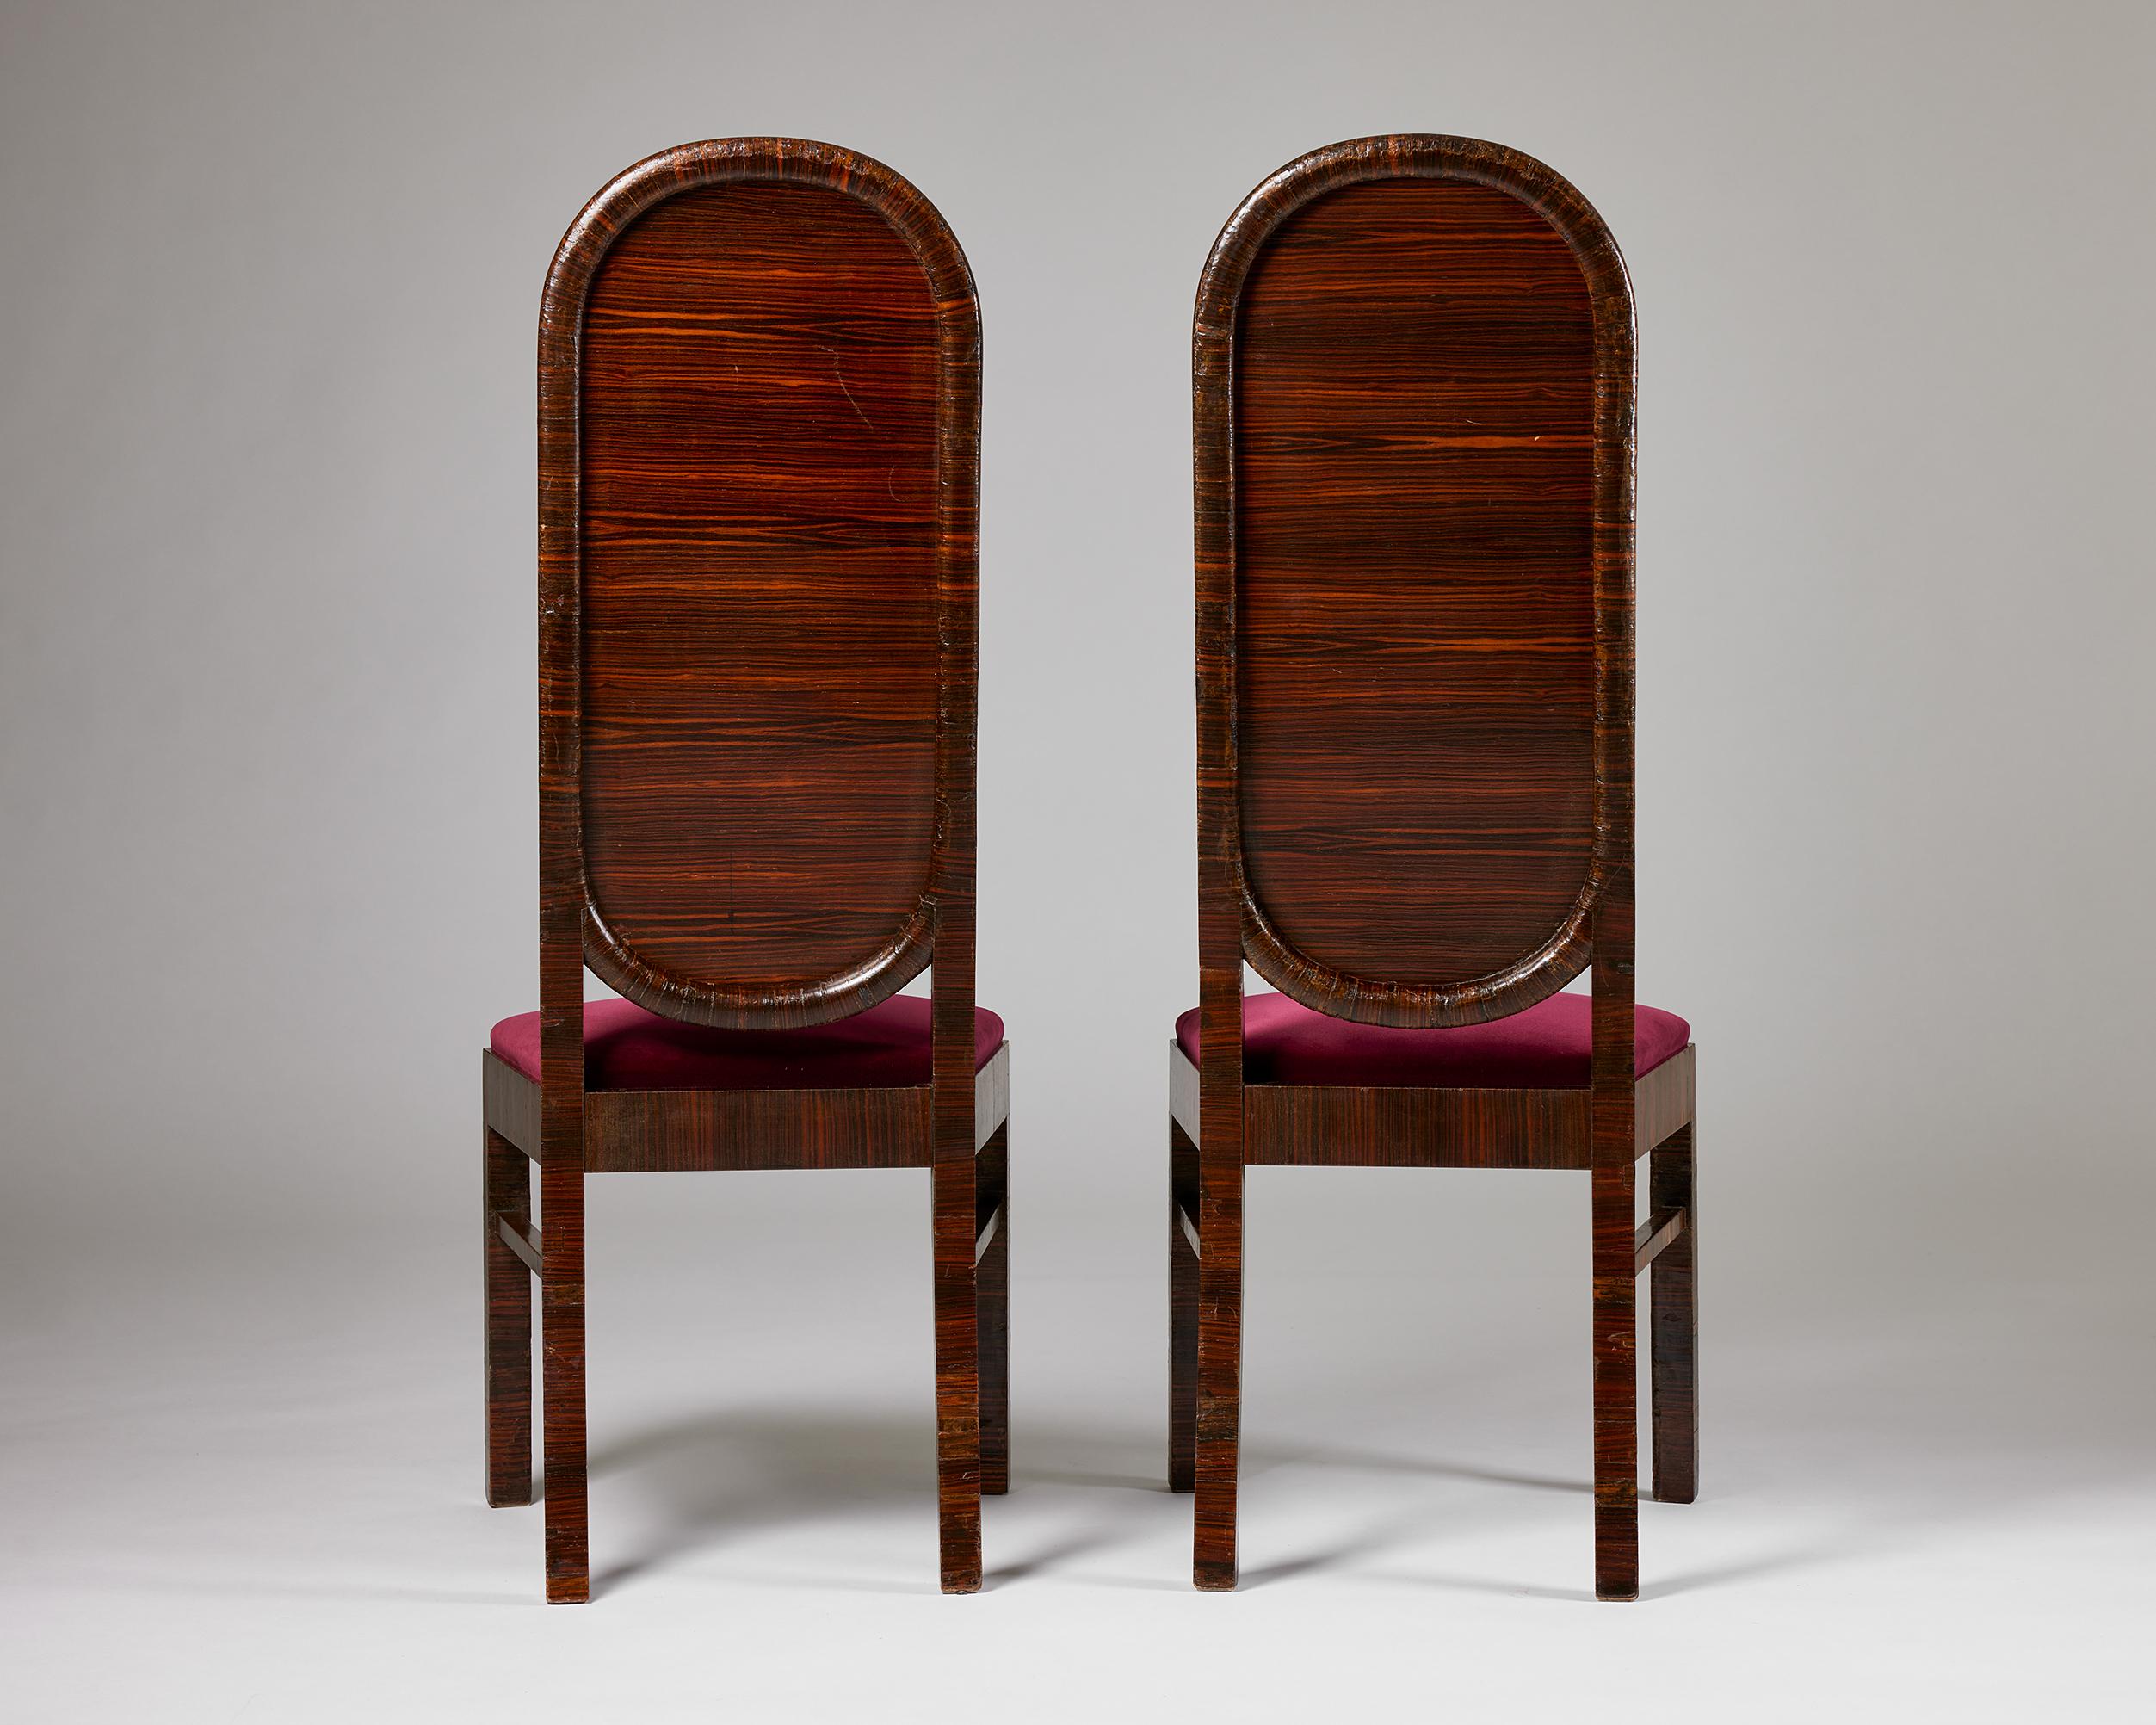 Pair of dining chairs designed by Axel Einar Hjorth for Nordiska Kompaniet In Good Condition For Sale In Stockholm, SE